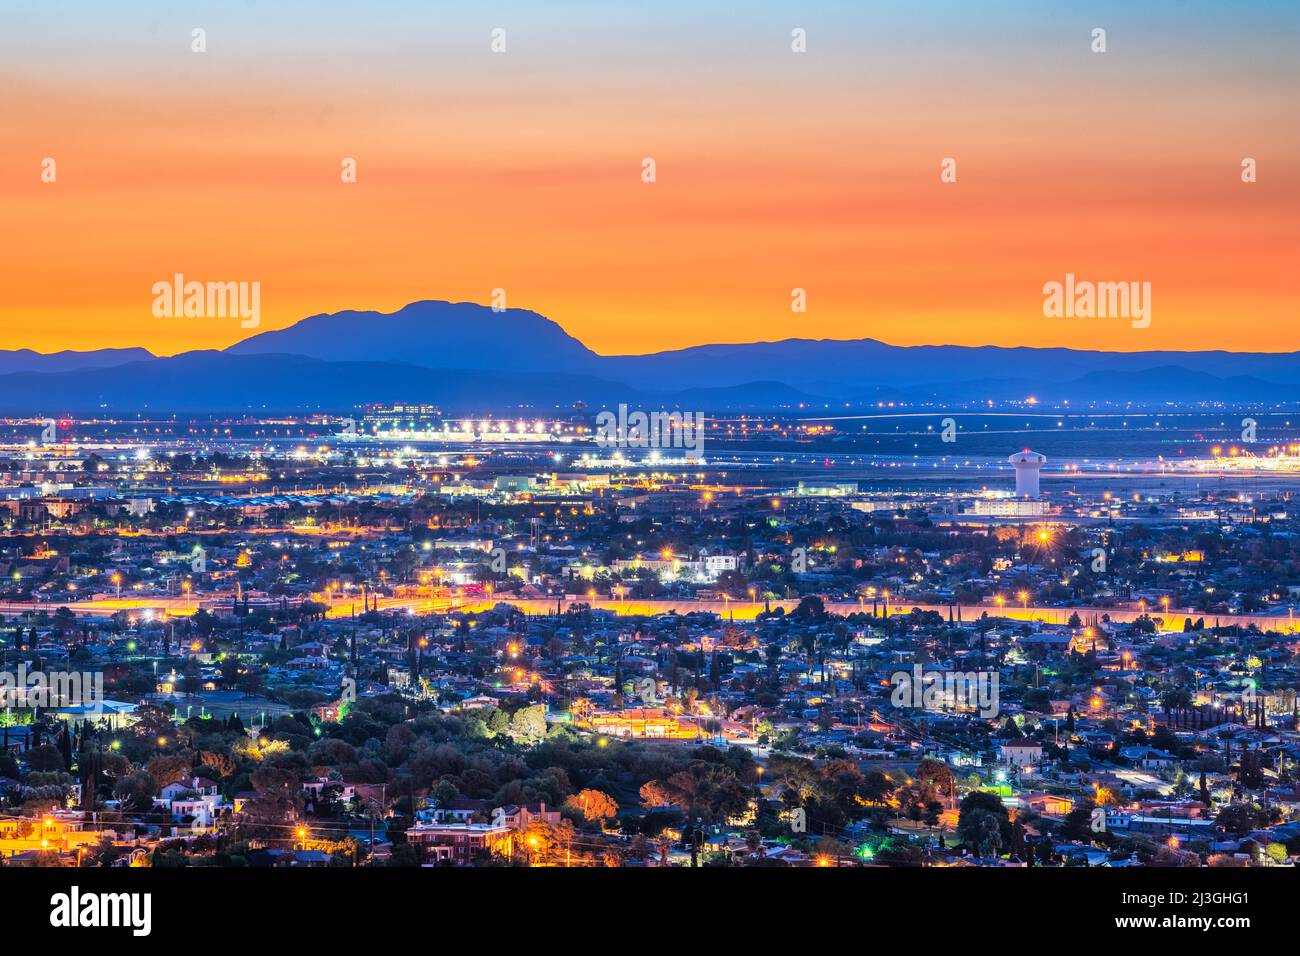 El Paso, Texas, USA  downtown city skyline in the morning with mountains. Stock Photo